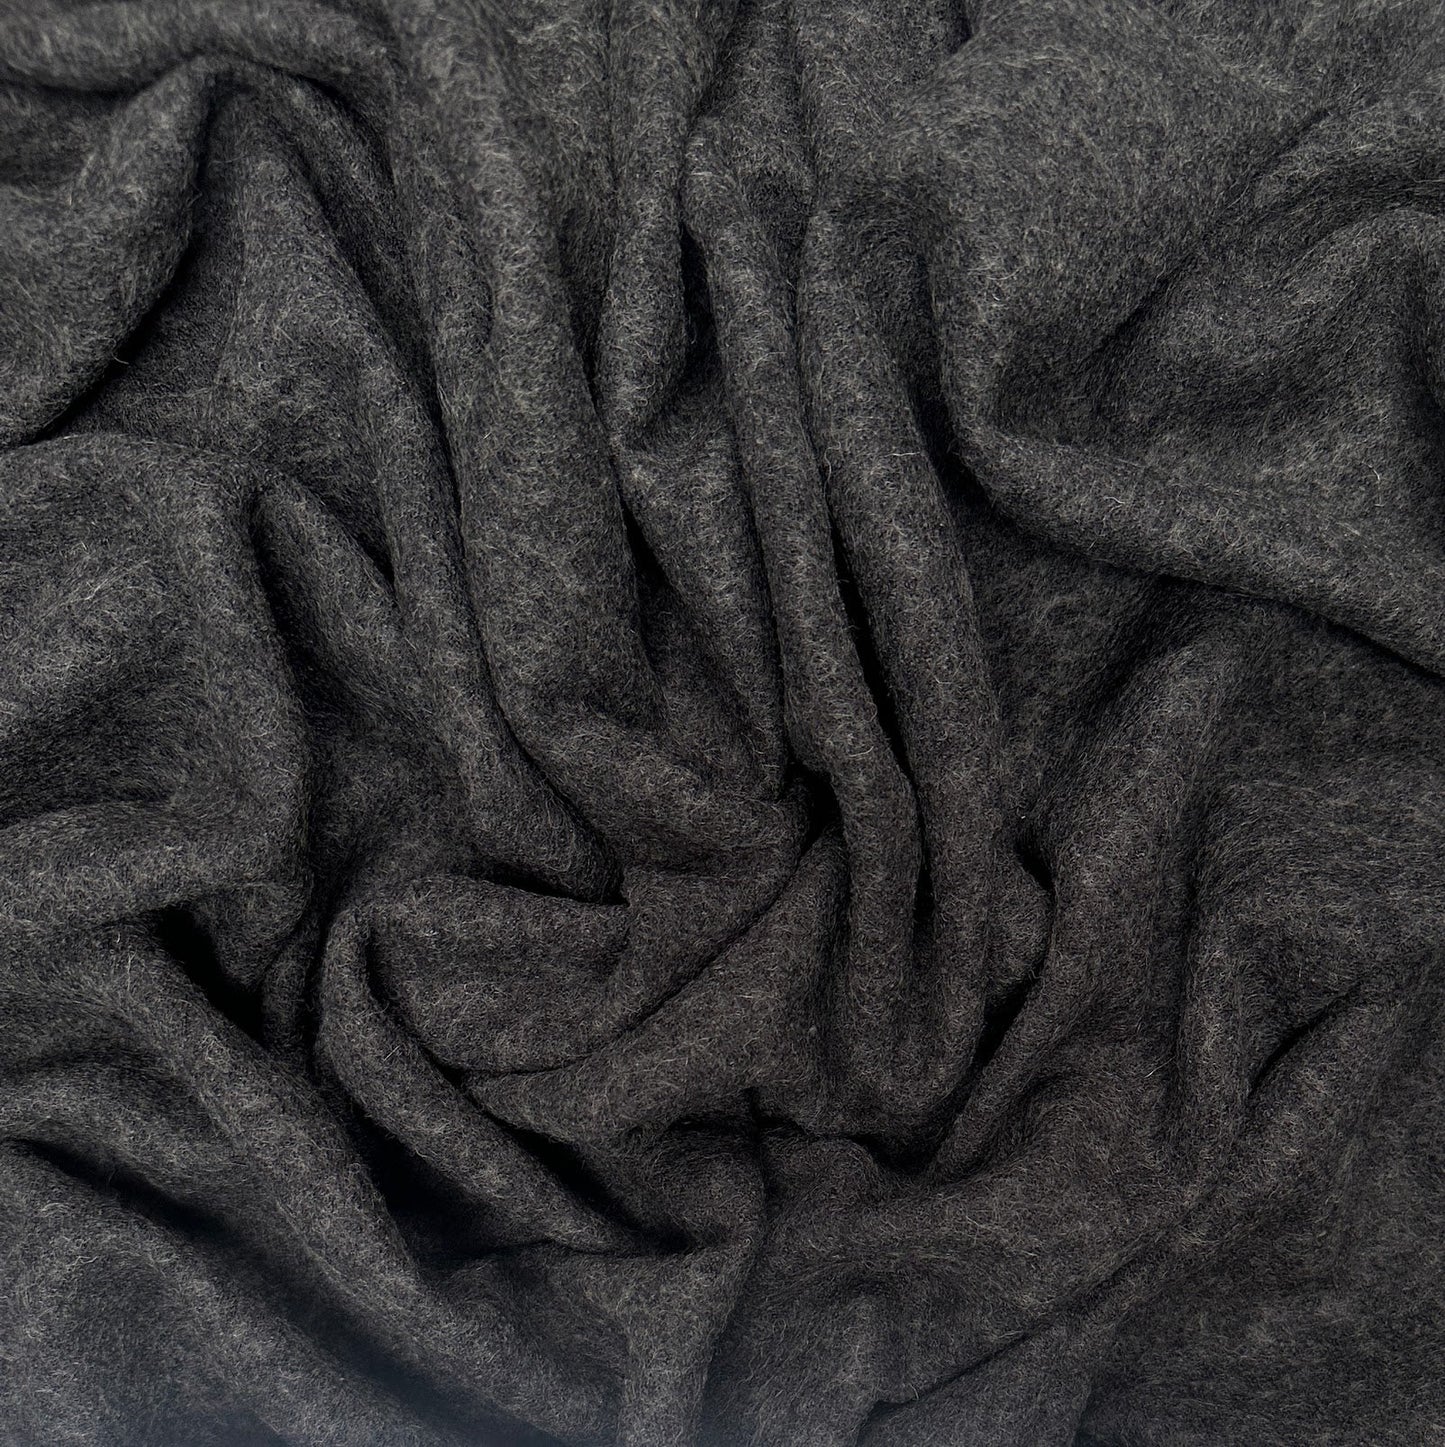 38" Remnant - Wool Viscose Charcoal Grey Coating - Deadstock